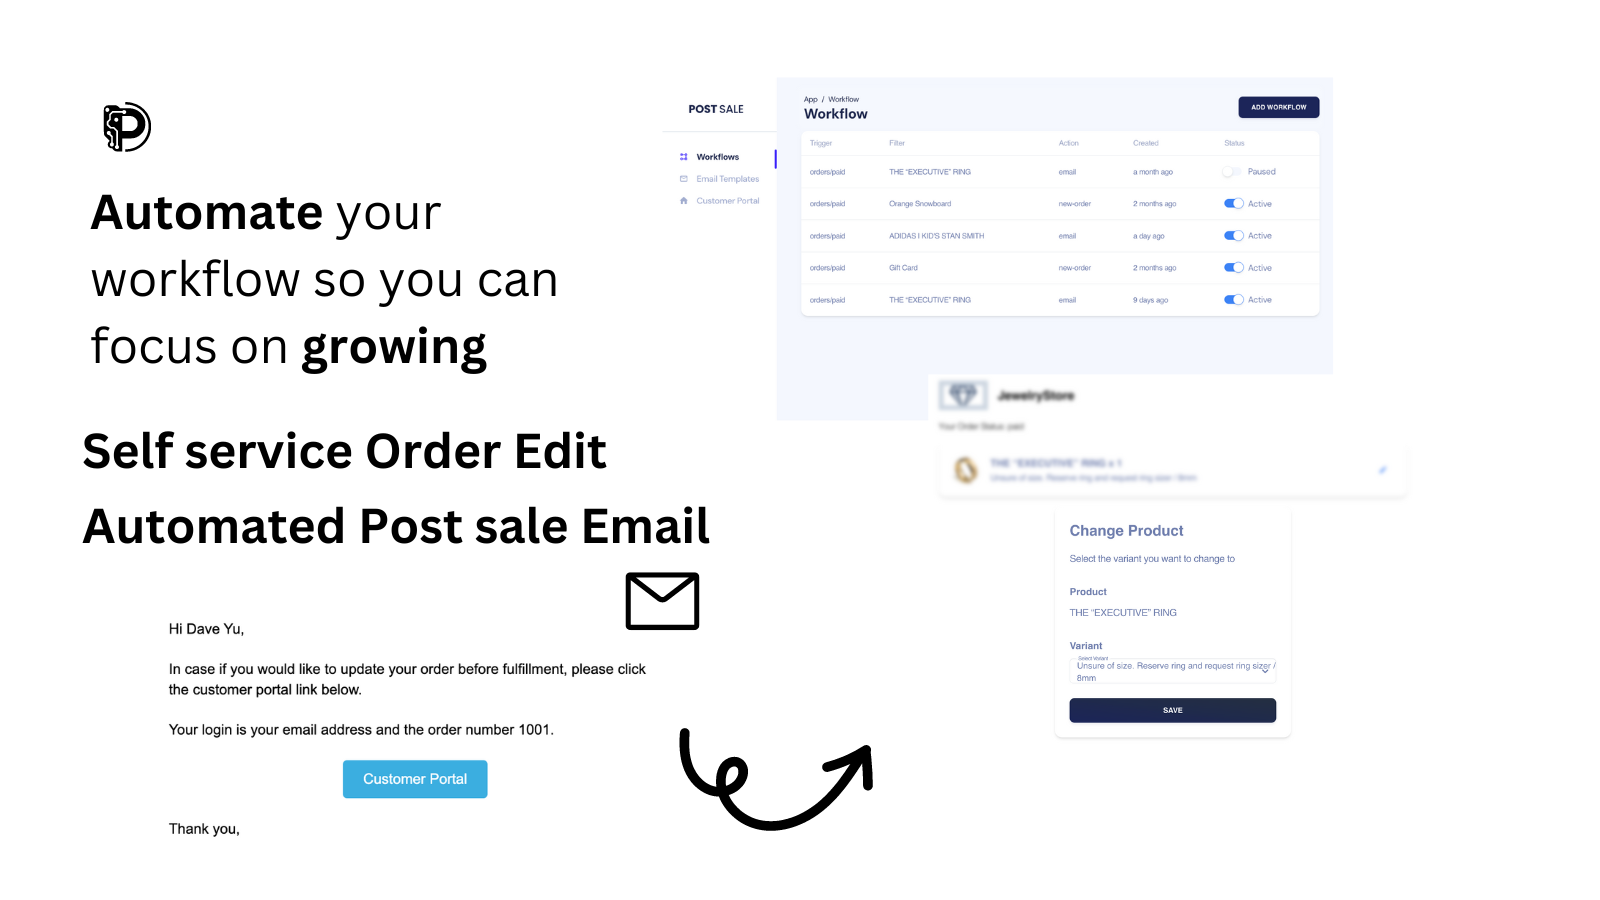 automated post sale email for customer order edit